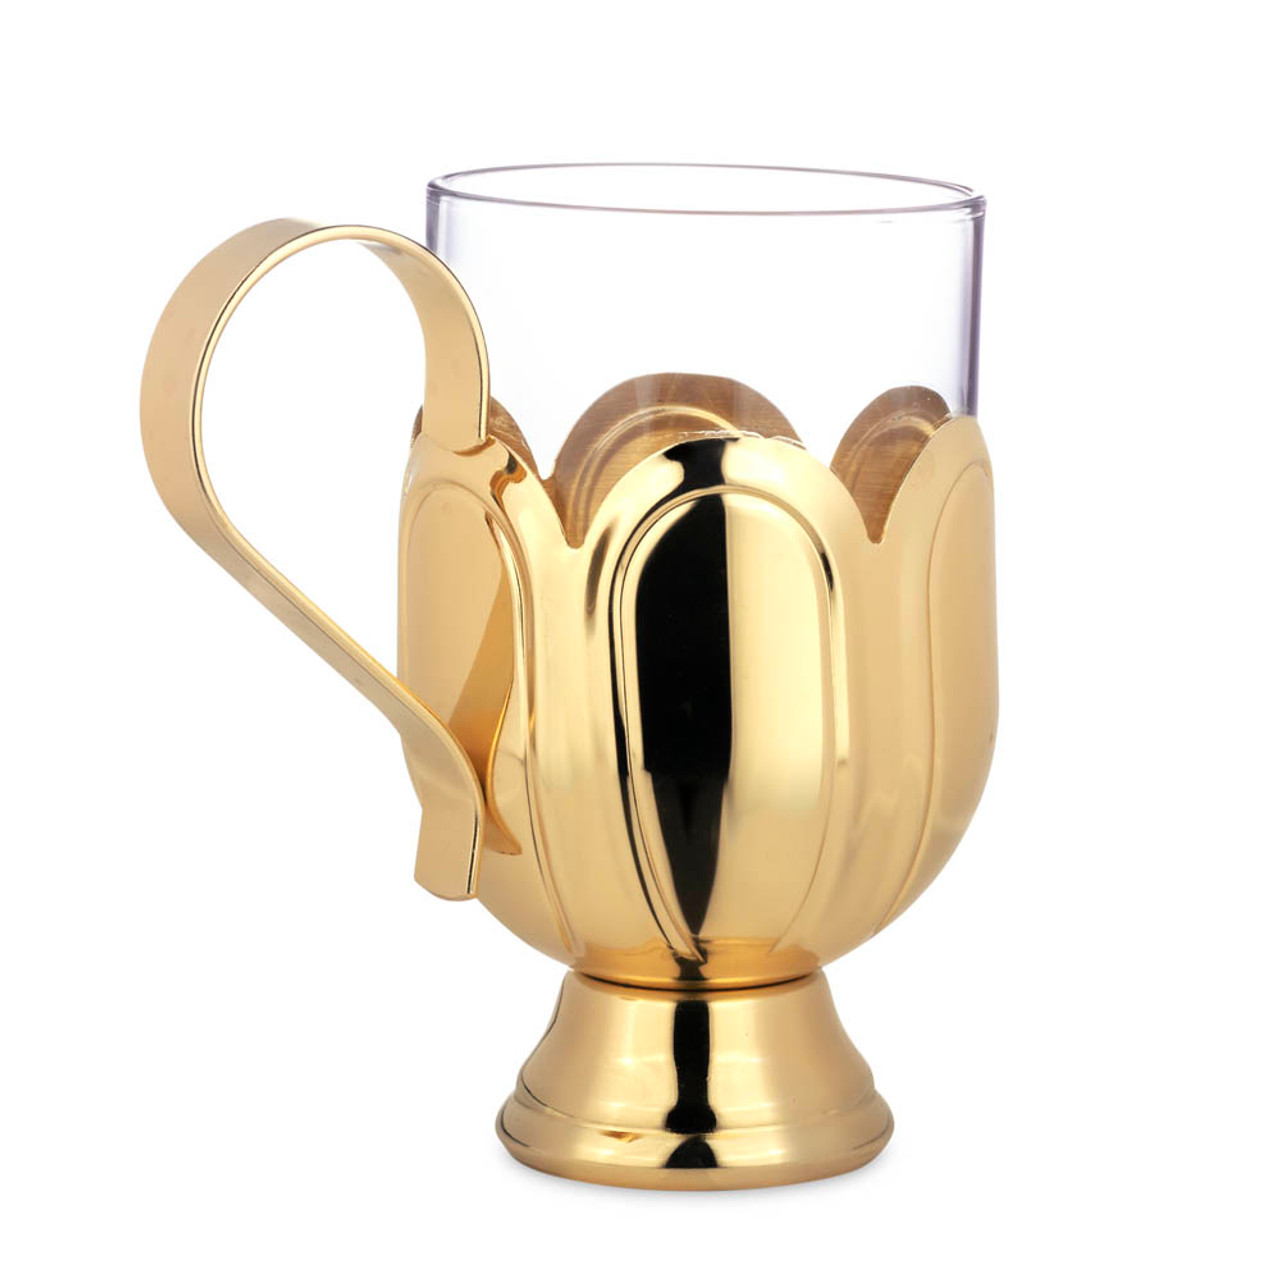 Mulled Wine & Cider Mug - Glass & Stainless Steel with Gold Finish